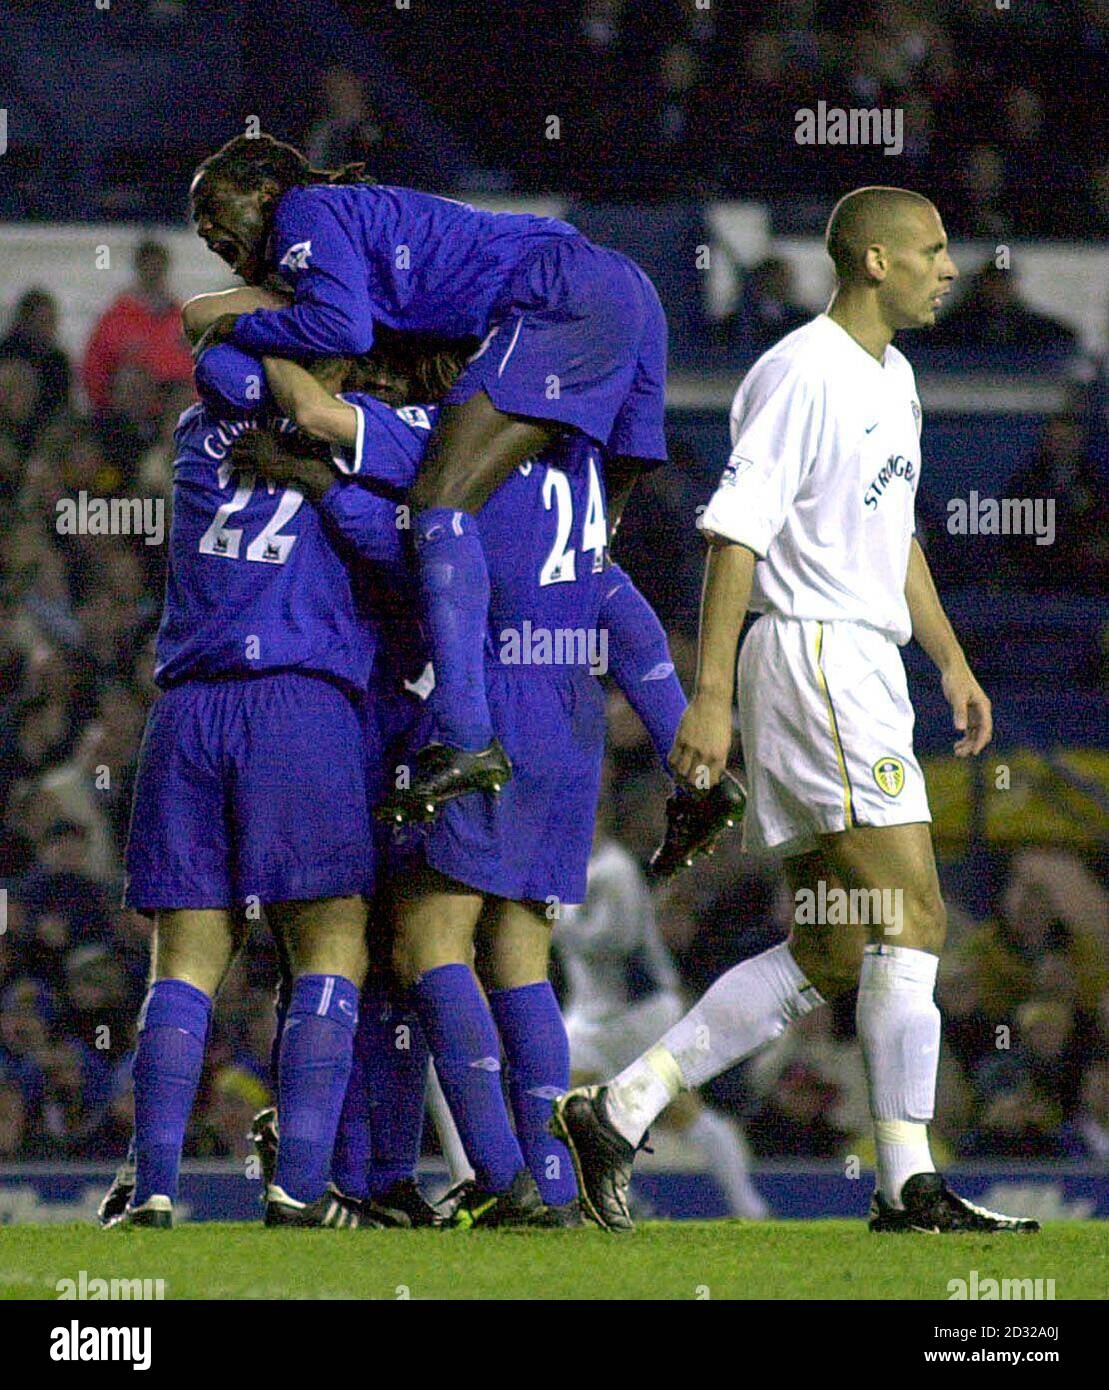 Leeds United's Rio Ferdinand (right) walks past dejected as Chelsea's Eidur Gudjohnsen is embraced by team-mates after scoring the first goal during the Worthington Cup, fourth round game between Leeds United and Chelsea at Elland Road, Leeds.  THIS PICTURE CAN ONLY BE USED WITHIN THE CONTEXT OF AN EDITORIAL FEATURE. NO WEBSITE/INTERNET USE UNLESS SITE IS REGISTERED WITH FOOTBALL ASSOCIATION PREMIER LEAGUE.  Stock Photo